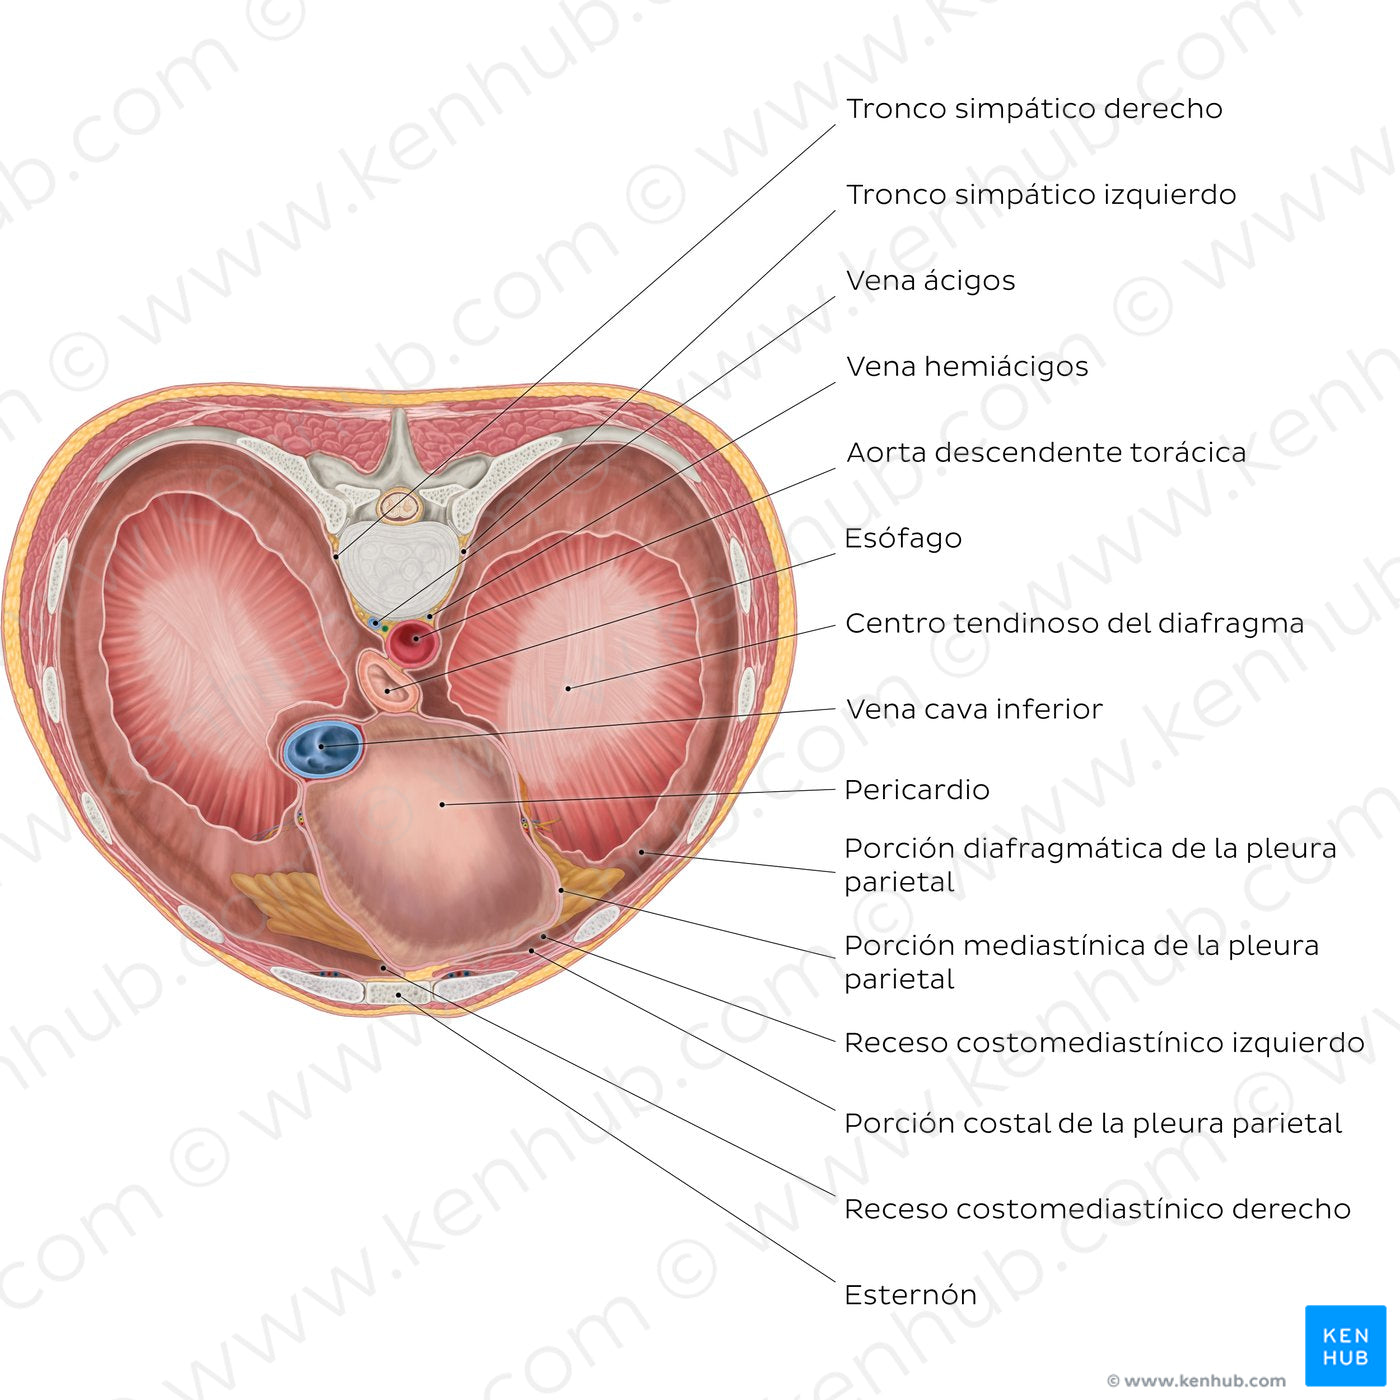 Thoracic surface of the diaphragm (Spanish)